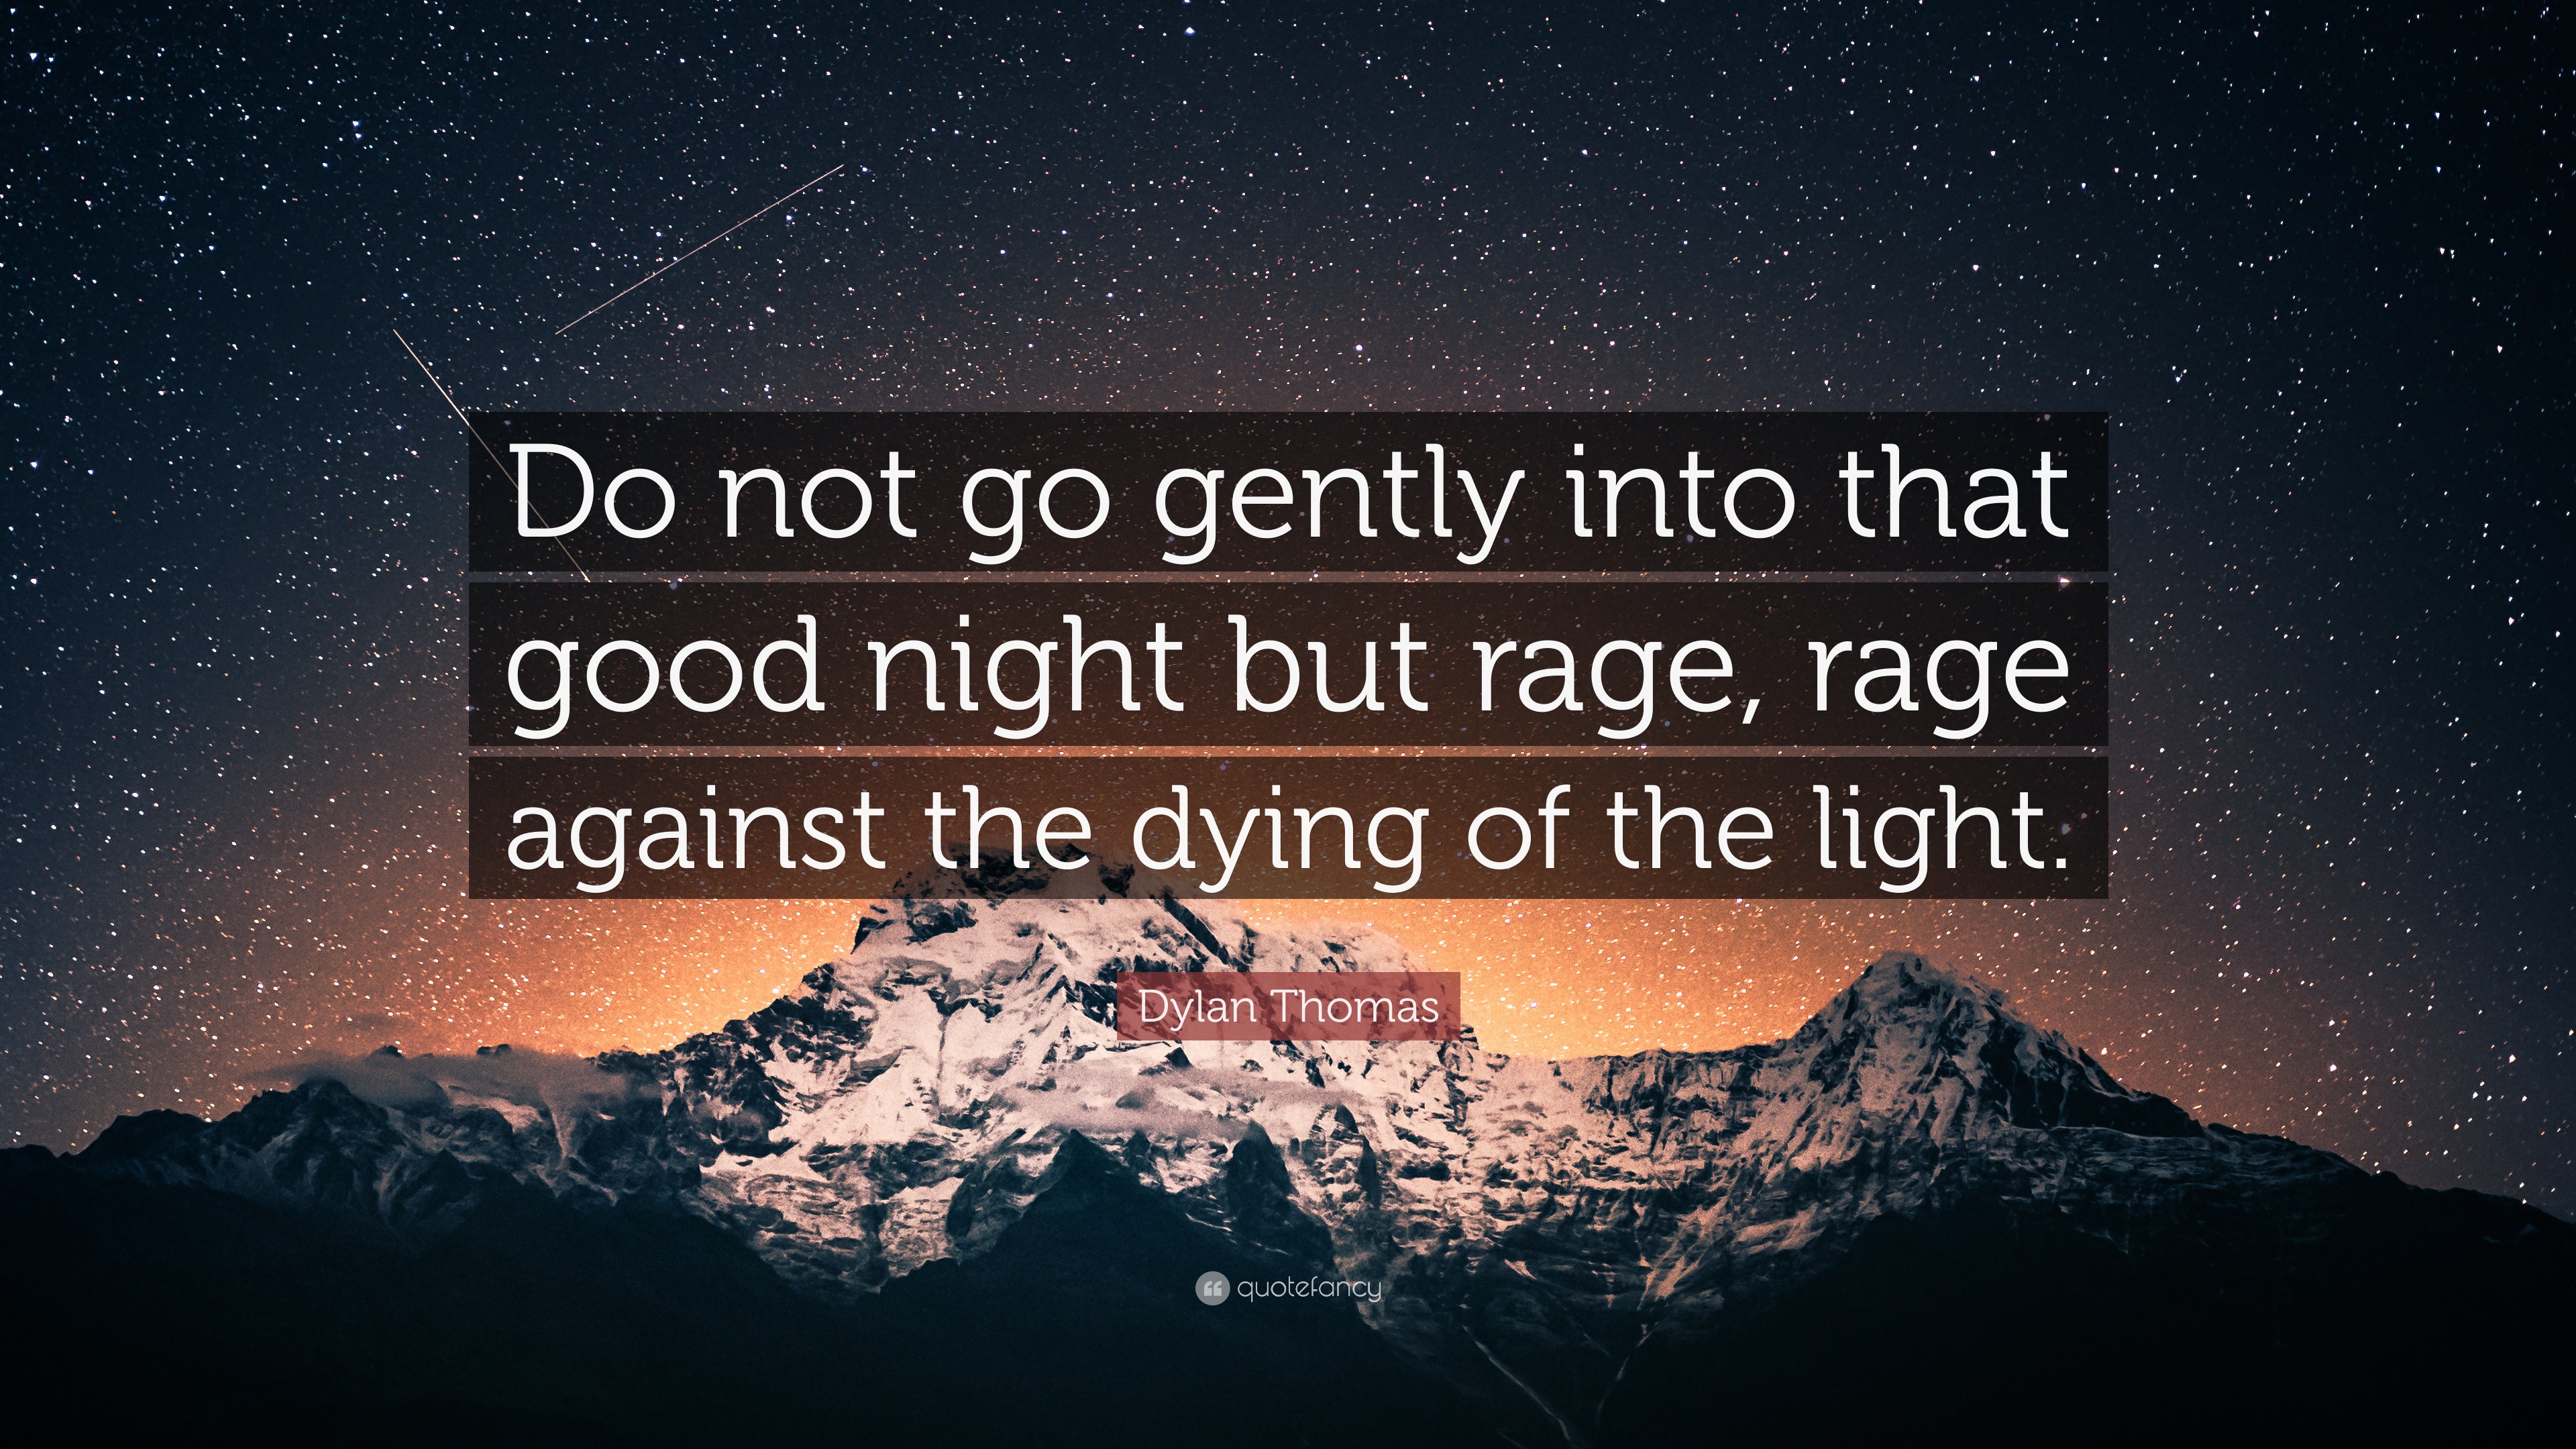 Dylan Thomas Quote Do Not Go Gently Into That Good Night But Rage Rage Against The Dying Of The Light 14 Wallpapers Quotefancy